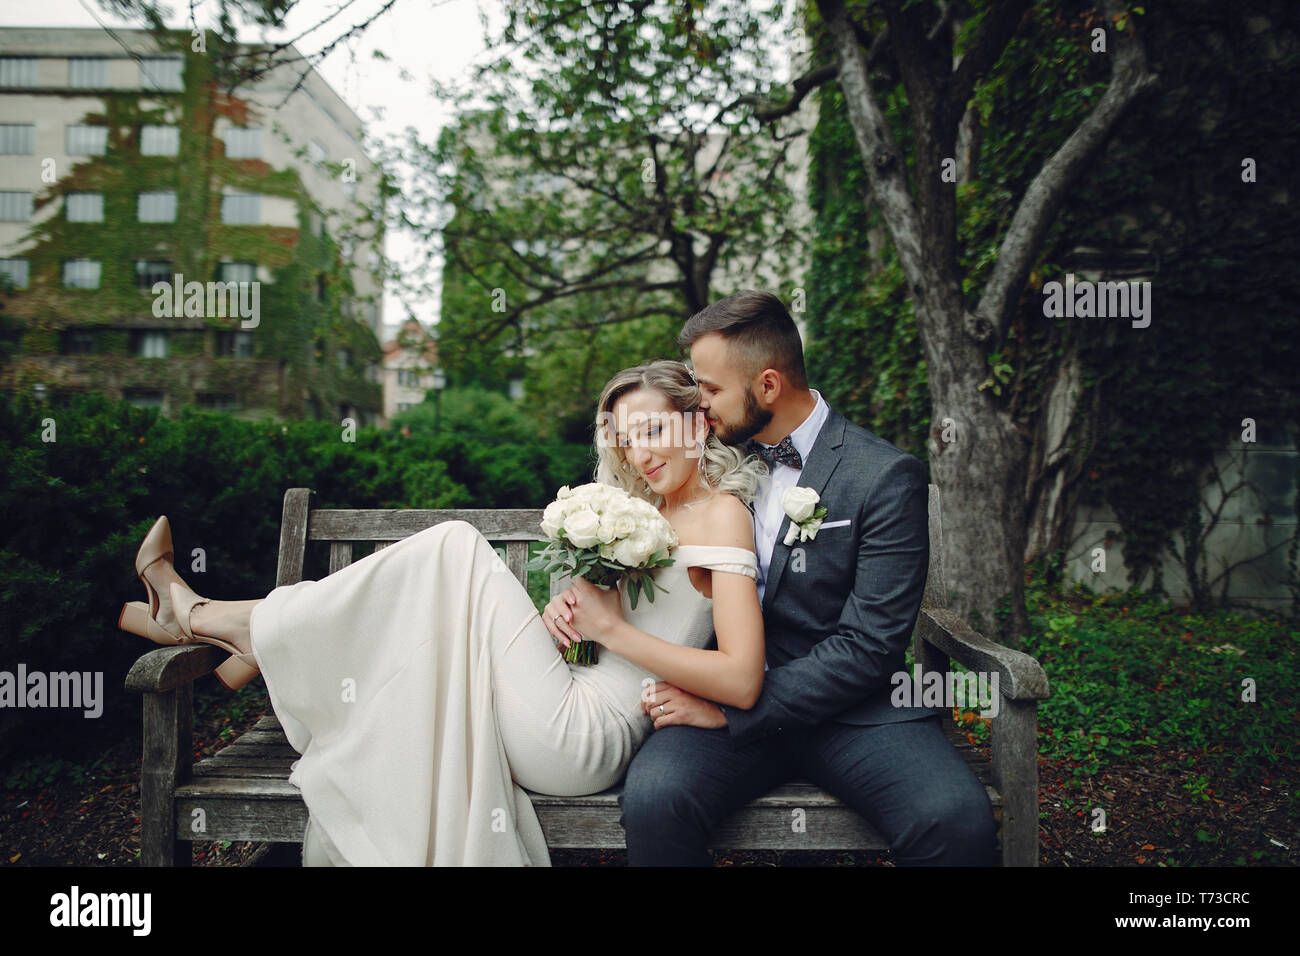 Young Couple Bride Groom Getting Married Stock Photo 1243674793 |  Shutterstock